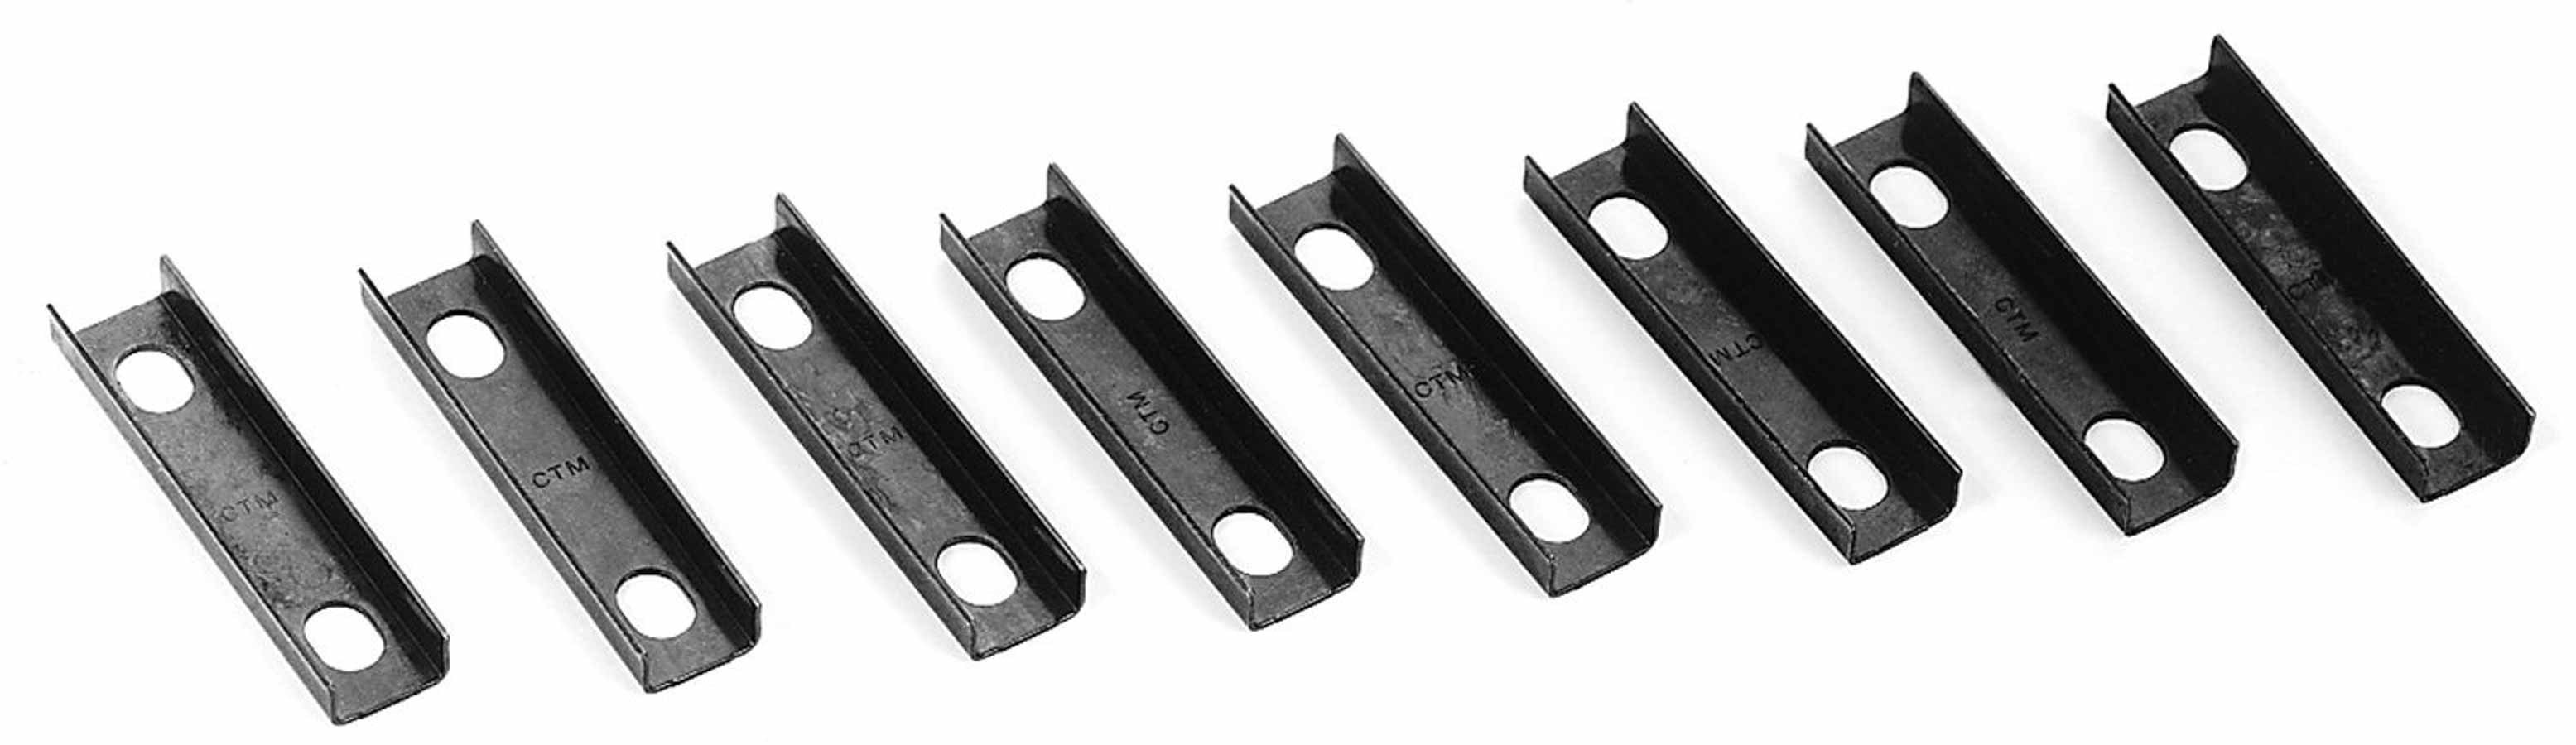 Ford Performance M6588-A50 Rocker Arm Channel, Steel, Natural, Small Block Ford, Set of 8